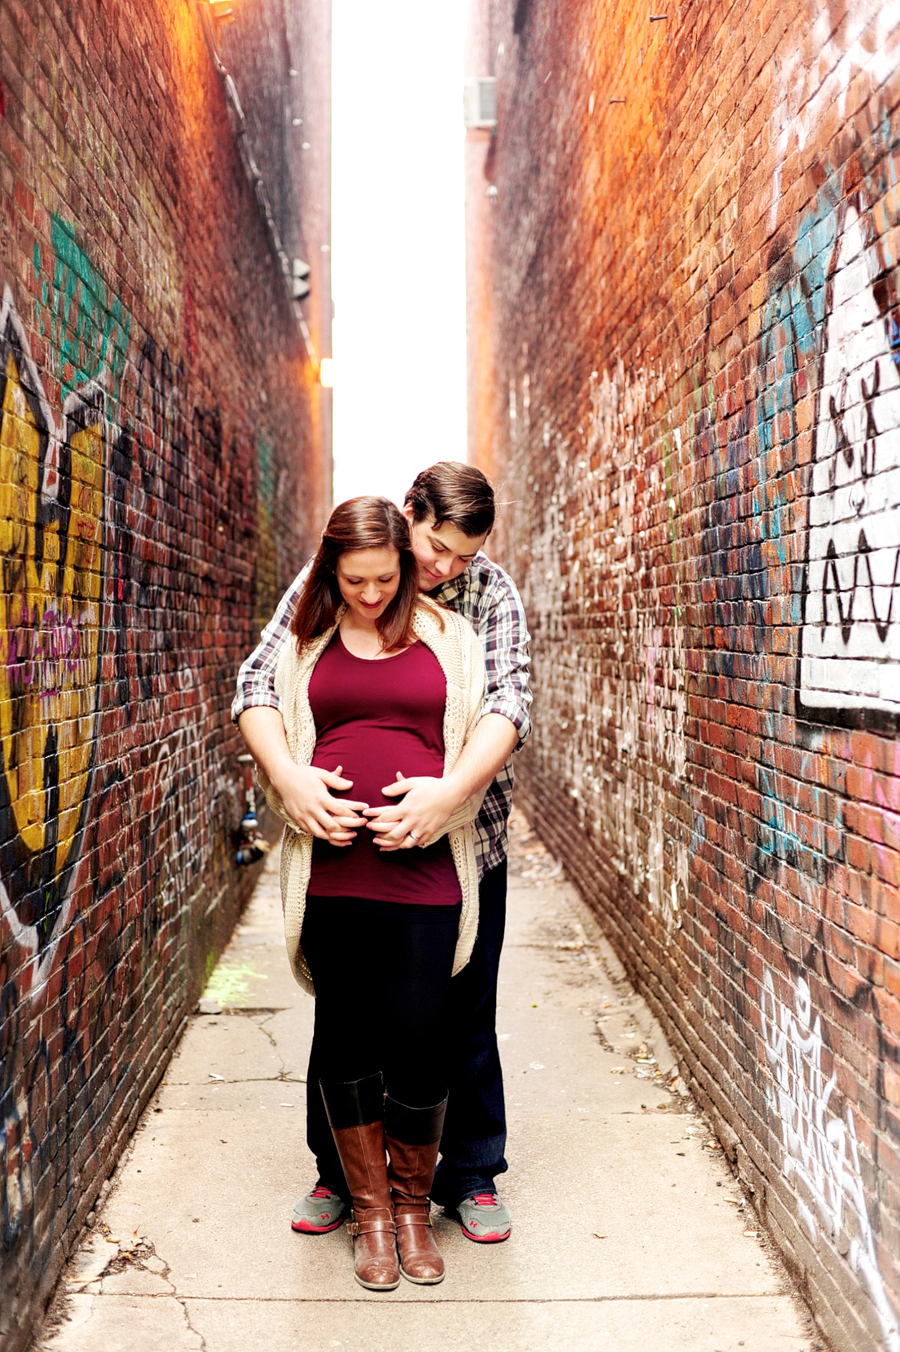 maternity session in graffiti alleyway